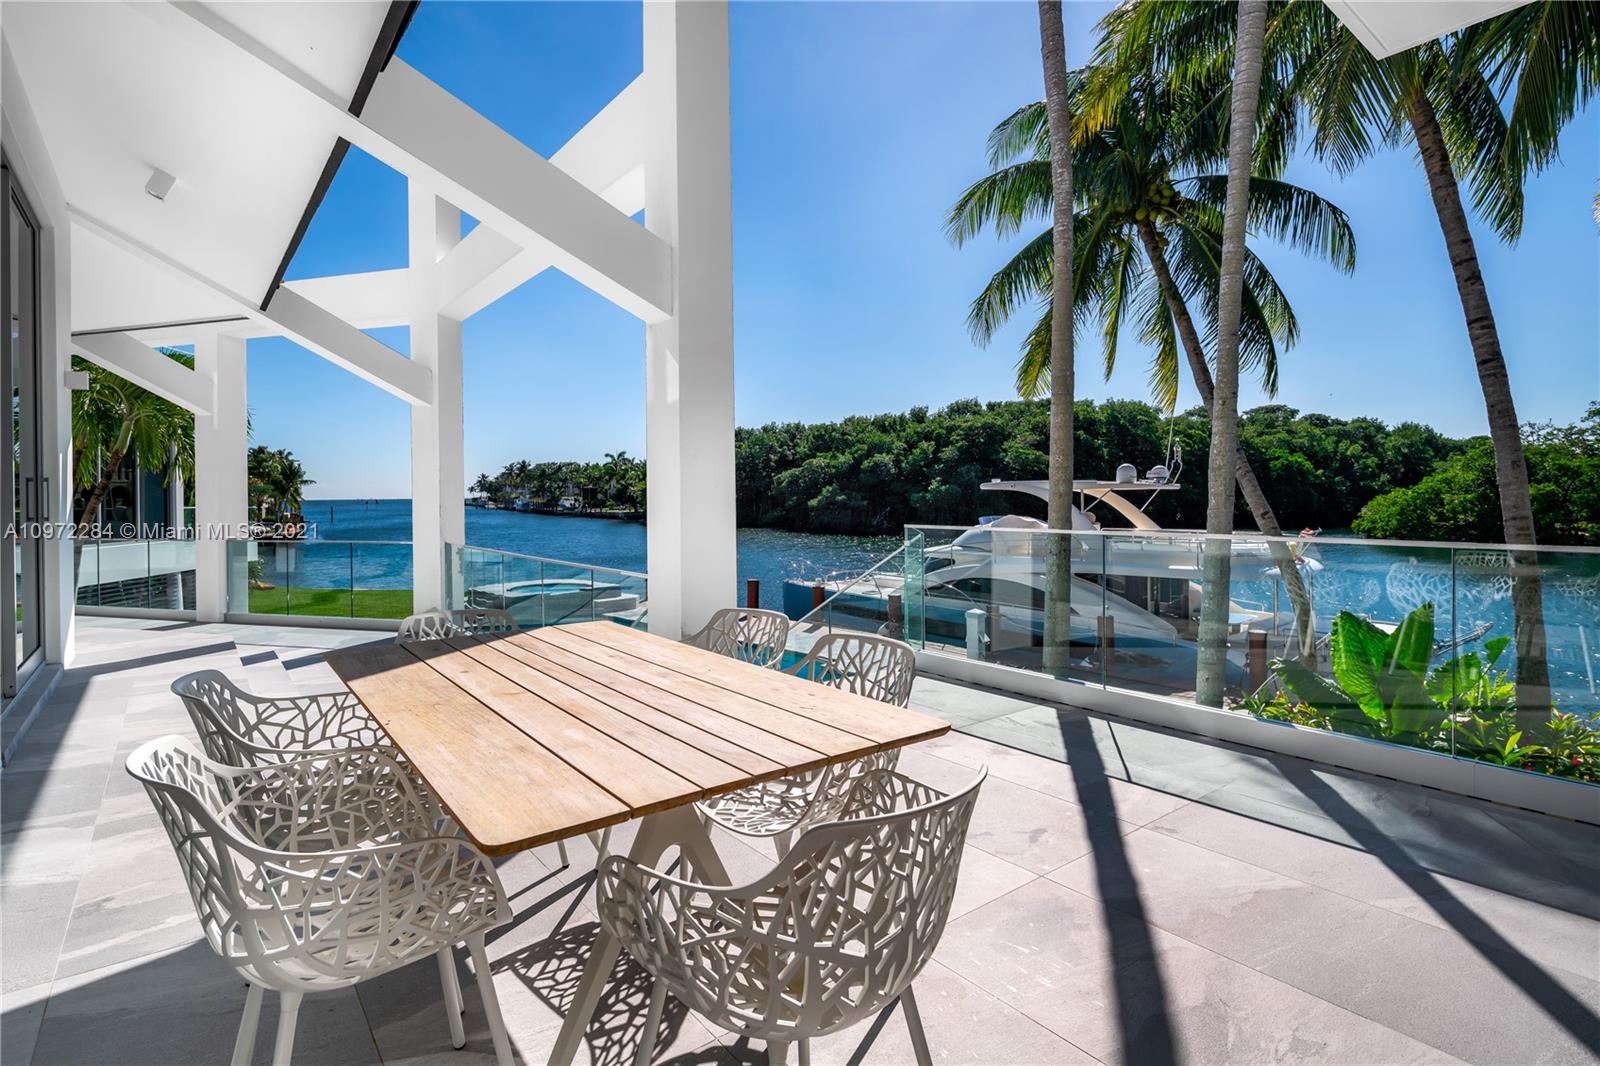 Completely rebuilt with custom chic modern design by Carmen Alcaraz Gomes of CG1 Design. This waterfront home is nestled on a quiet cul-de-sac in the guard-gated community, Sunrise Harbour. Perfectly situated on a SE corner with 189 ft waterfrontage on Coral Gables Waterway, showcasing unobstructed bay views. Deep water and new 120 ft dock easily accommodate a large yacht. Multiple terraces overlook the pool and spa creating intimate entertaining spaces. Interior features include open floor plan, double height ceiling, custom glass encased wine cellar, 3 car garage and elevator. Master suite features two walk-in closets, private balcony, separate shower and jacuzzi for two. Kitchen with Miele appliances, chef’s island, and breakfast nook. Close to parks, shops, eateries, and A+ schools.